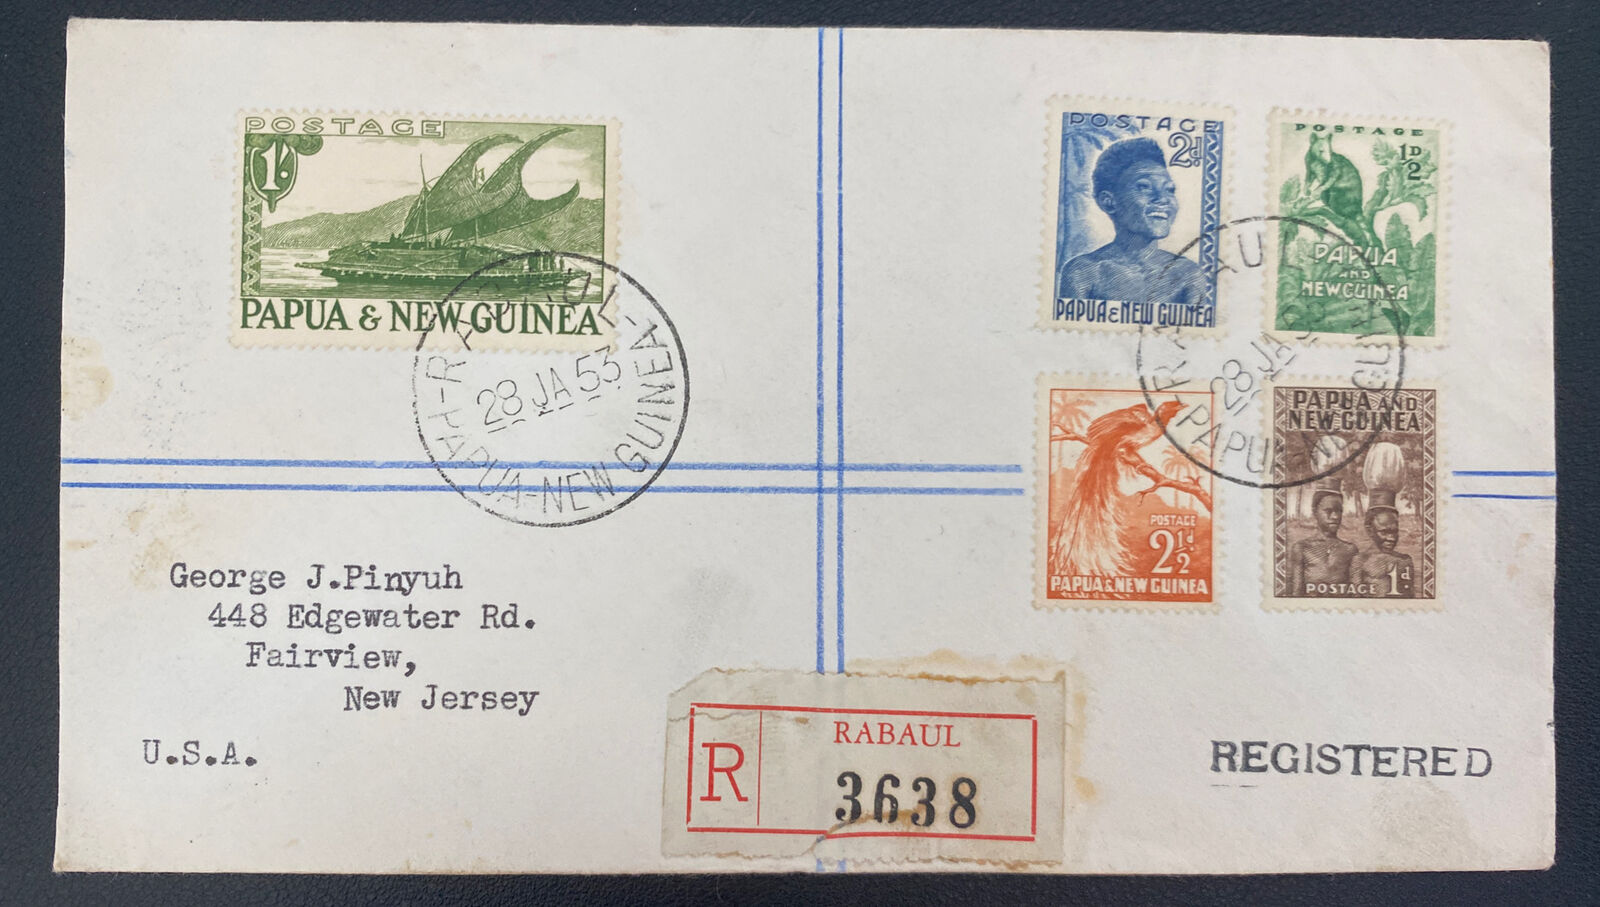 1953 Rabaul Papua New Guinea Registered Dallas Mall Usa To Don't miss the campaign NJ Fairview Cover